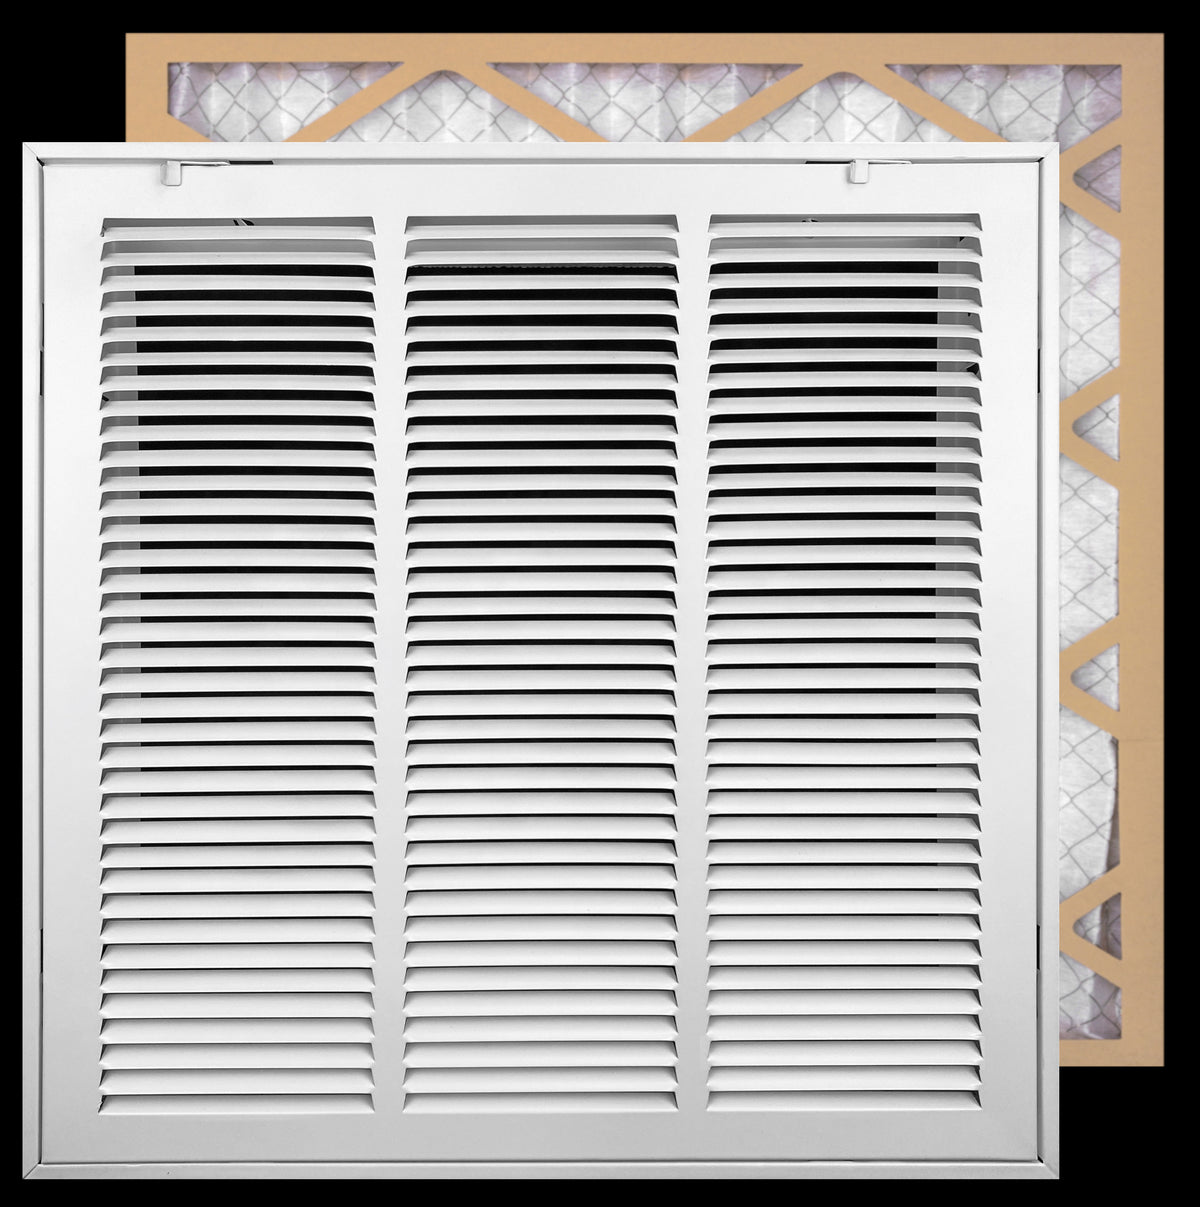 airgrilles 18" x 18" duct opening   filter included hd steel return air filter grille for sidewall and ceiling fil-7rafg1-wh-18x18 038775643894 - 1